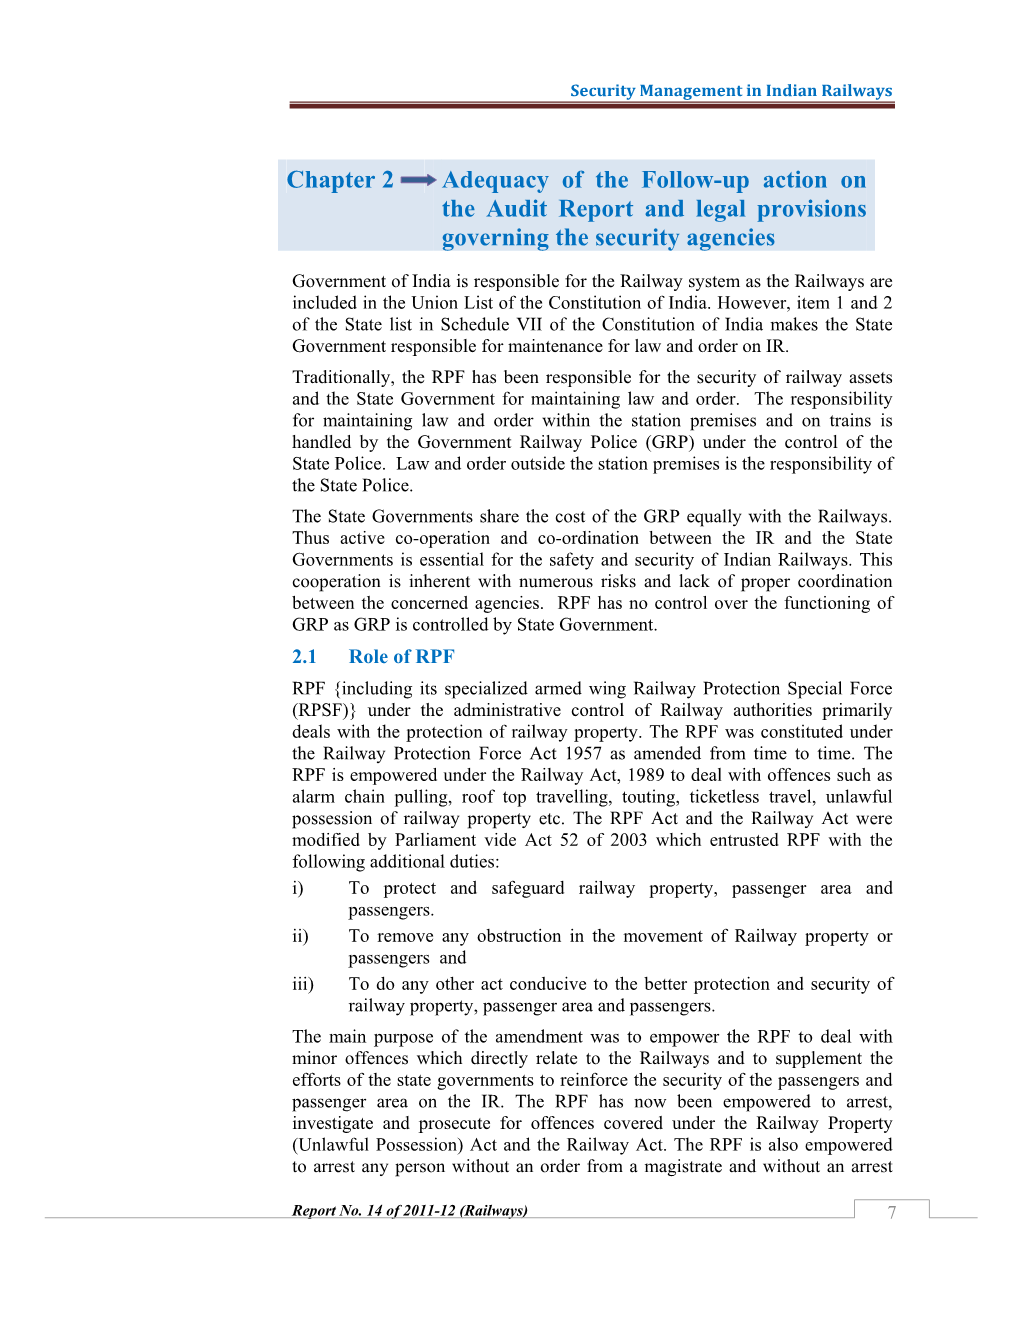 Chapter 2 Adequacy of the Follow-Up Action on the Audit Report and Legal Provisions Governing the Security Agencies